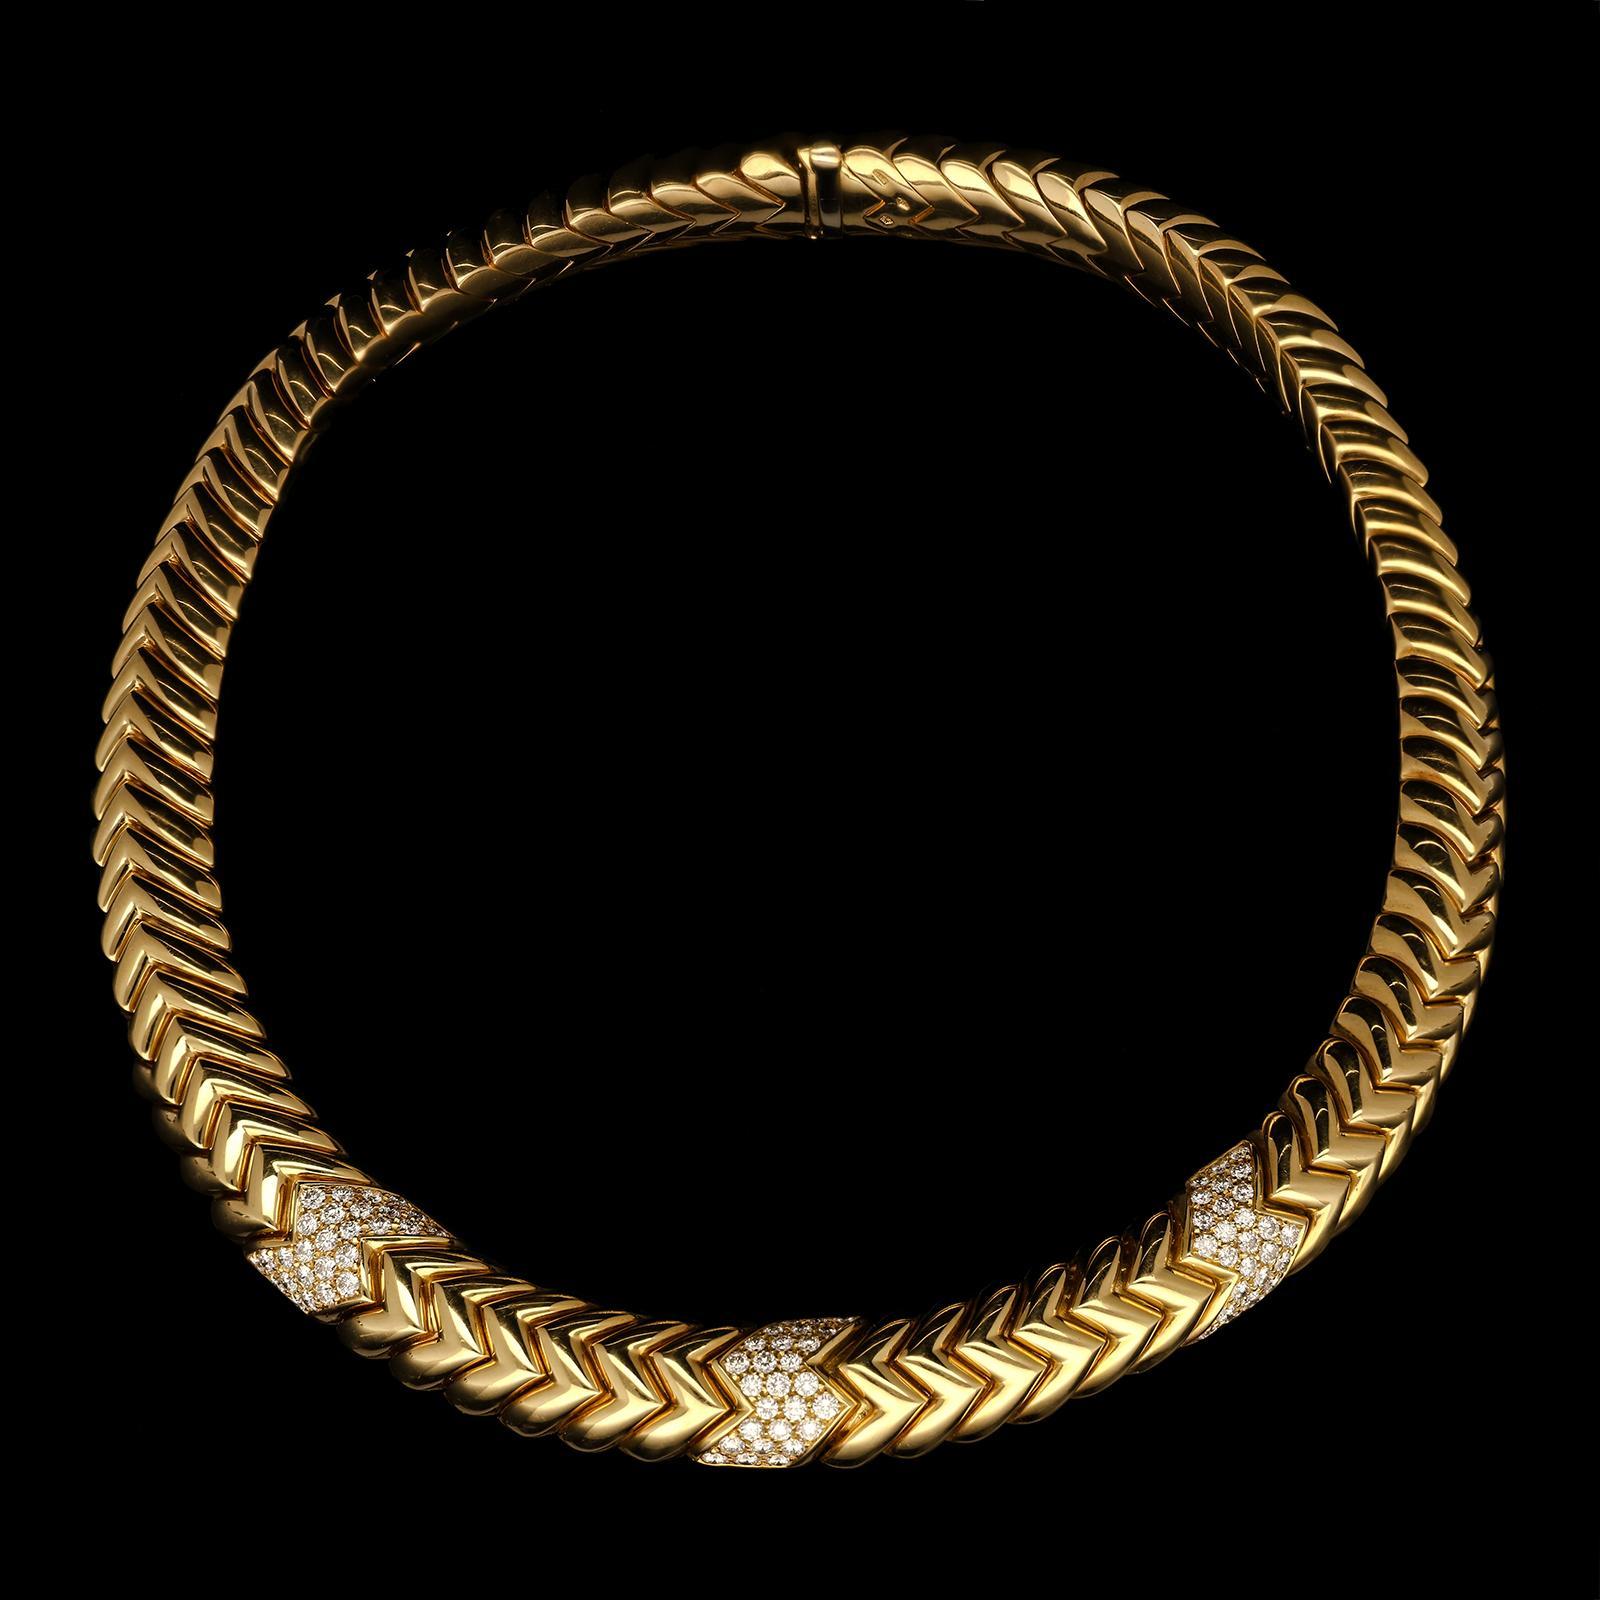 A stylish vintage gold and diamond Spiga necklace by Bulgari c.1970s, formed of closely set interlocking uniform links of zig-zag design, the front set with three evenly spaced diamond sections, each set with twenty seven round brilliant cut